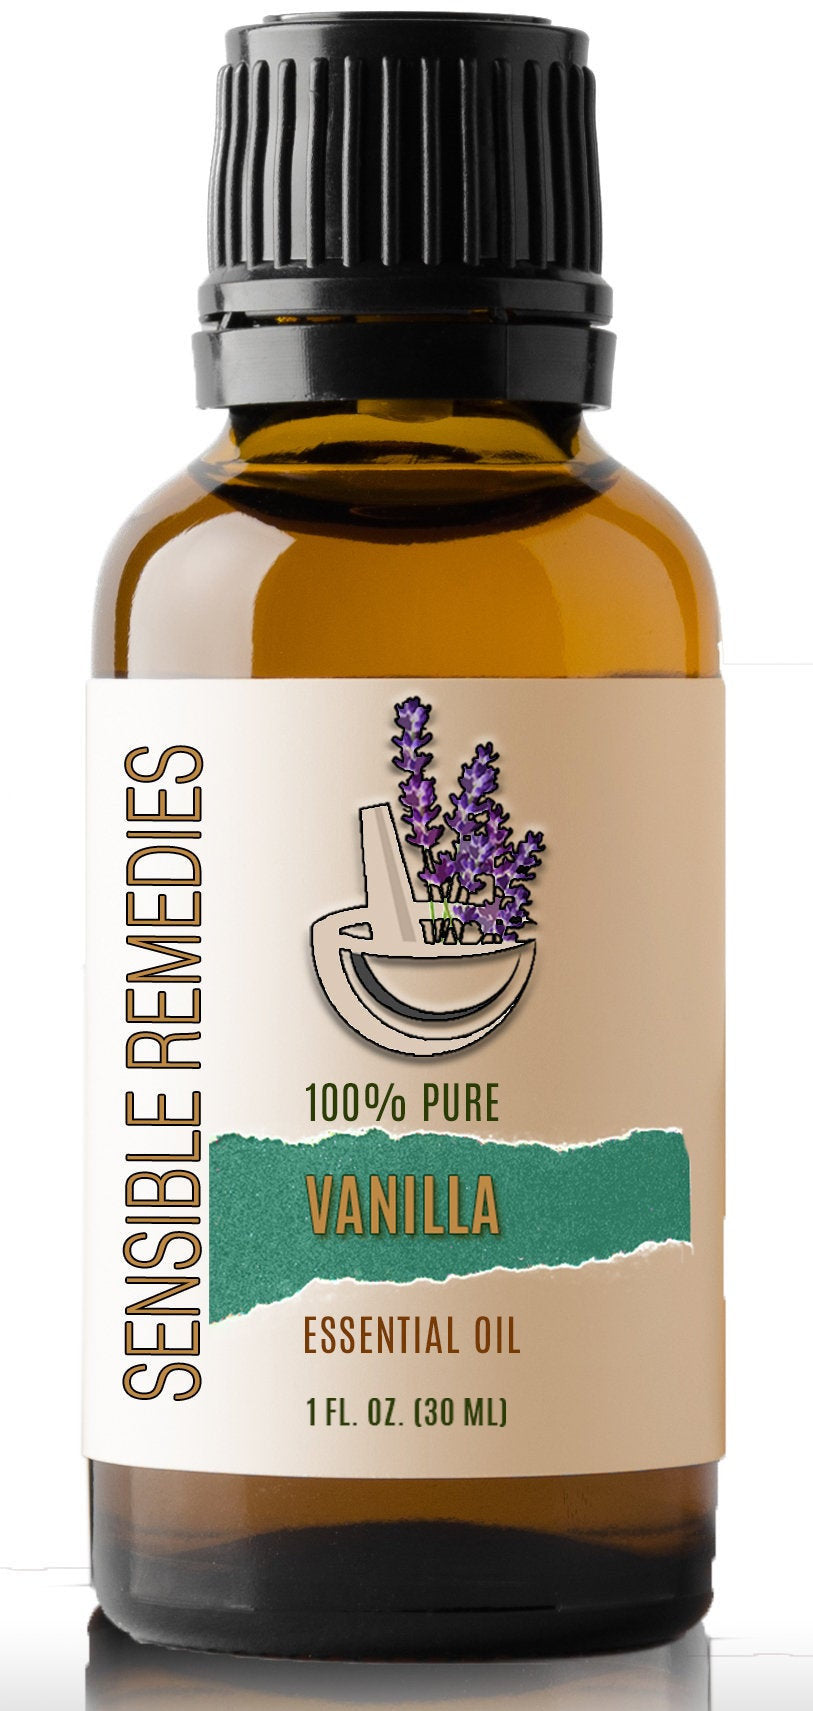 All About Vanilla Oleoresin  Vanilla oil, Young living essential